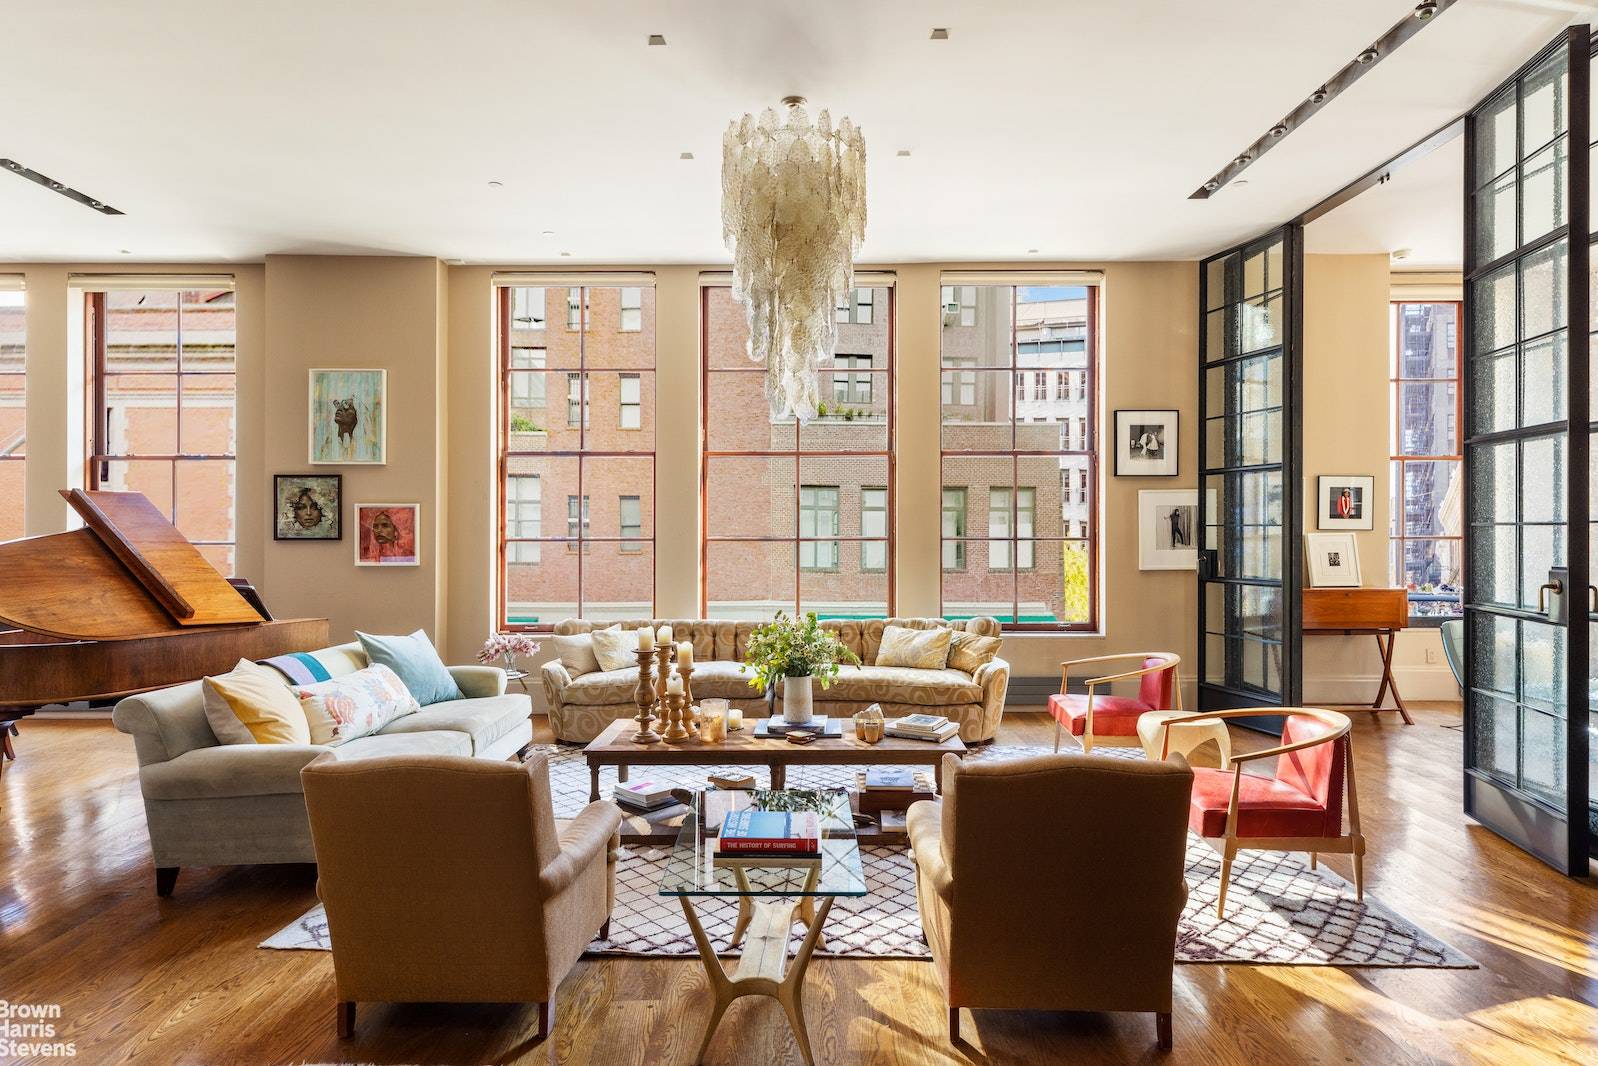 Located in Tribeca's most important landmark building, 140 Franklin Street is a majestic apartment like no other, a stylish urban mansion that affords unrivaled space, privacy and luxury.